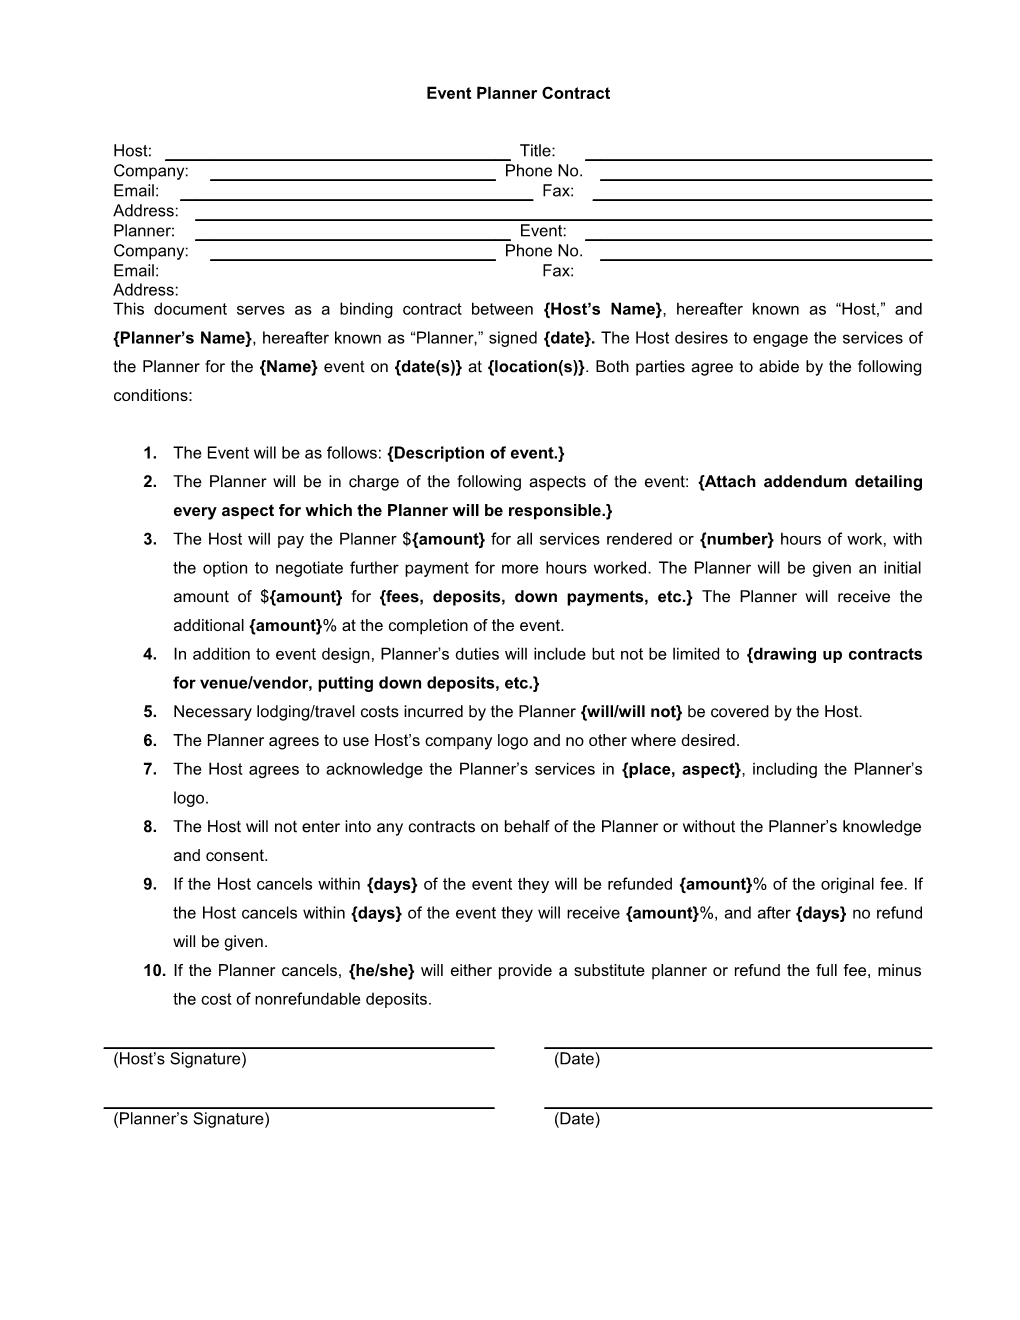 Printable Contracts: Event Planner Contract